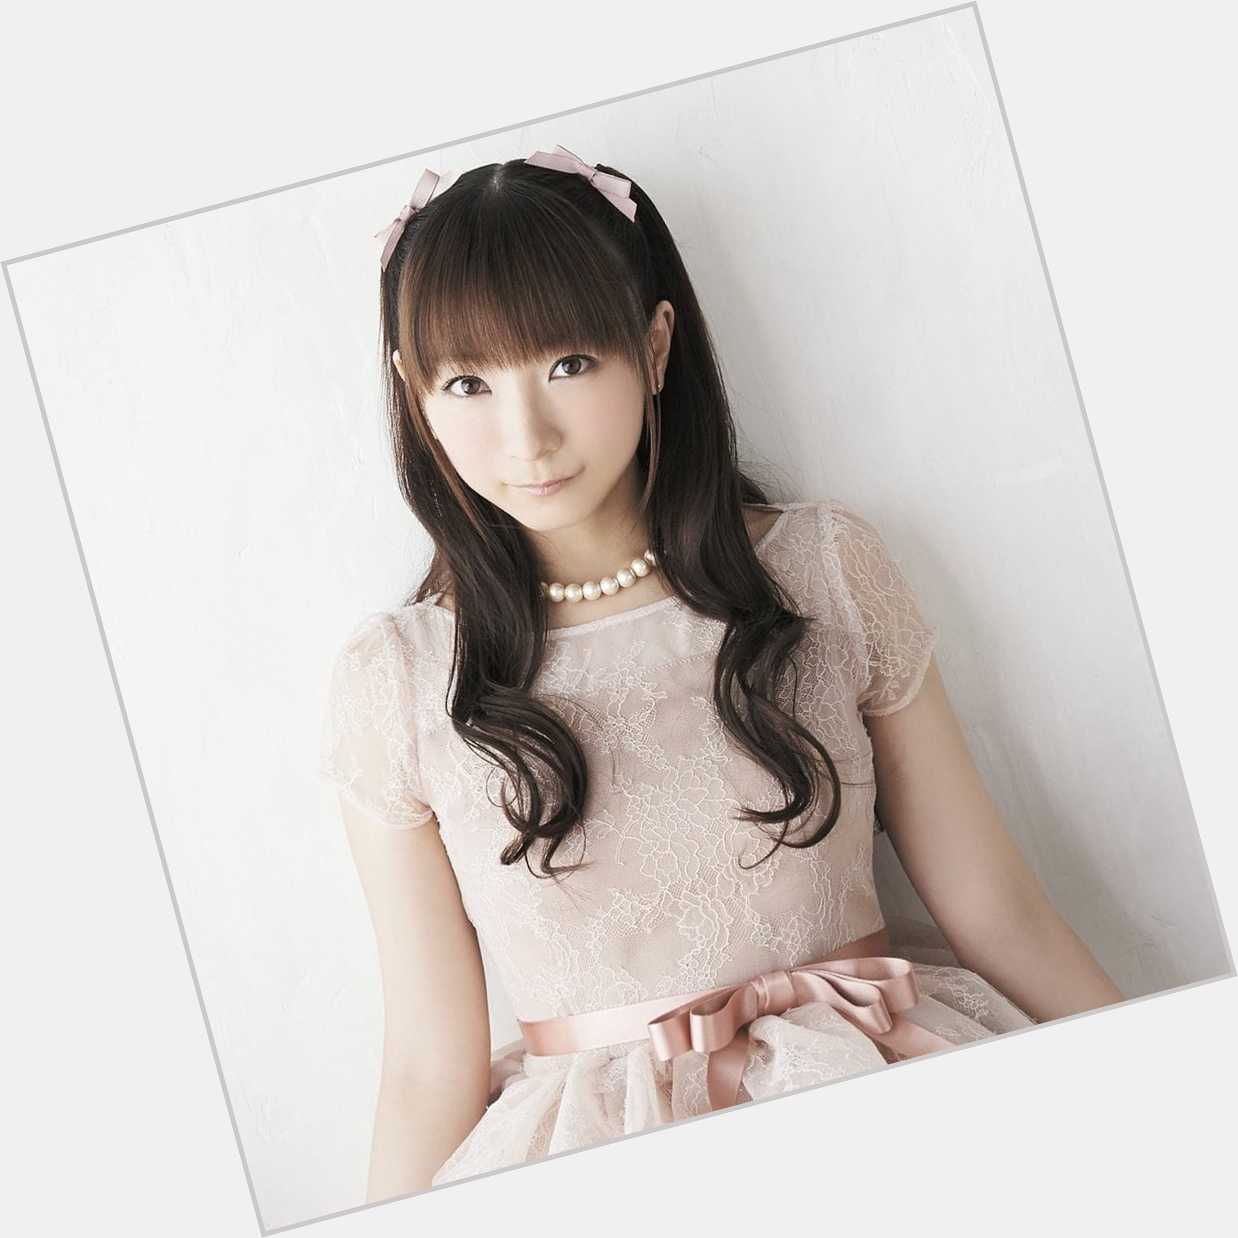 Yui Horie  